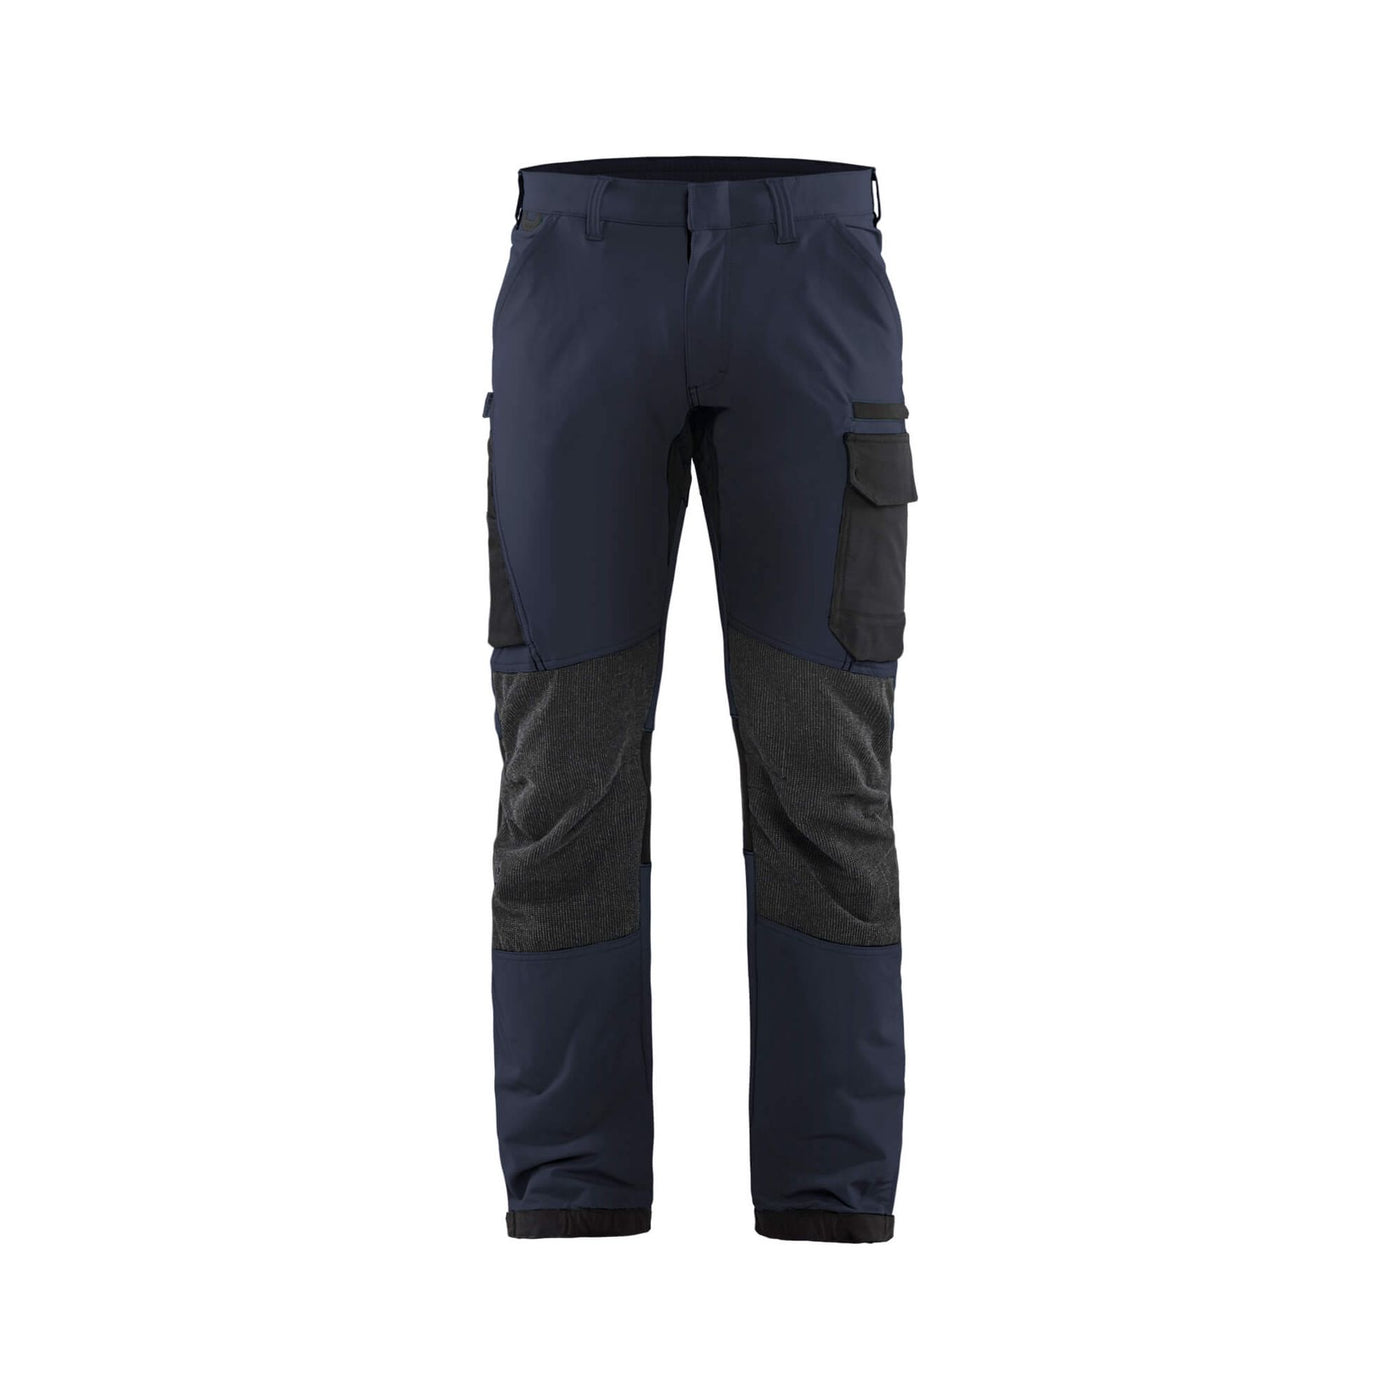 Blaklader 1422 4-Way-Stretch Trousers Cordura - Mens (14221645) -  (Colours 2 of 2)